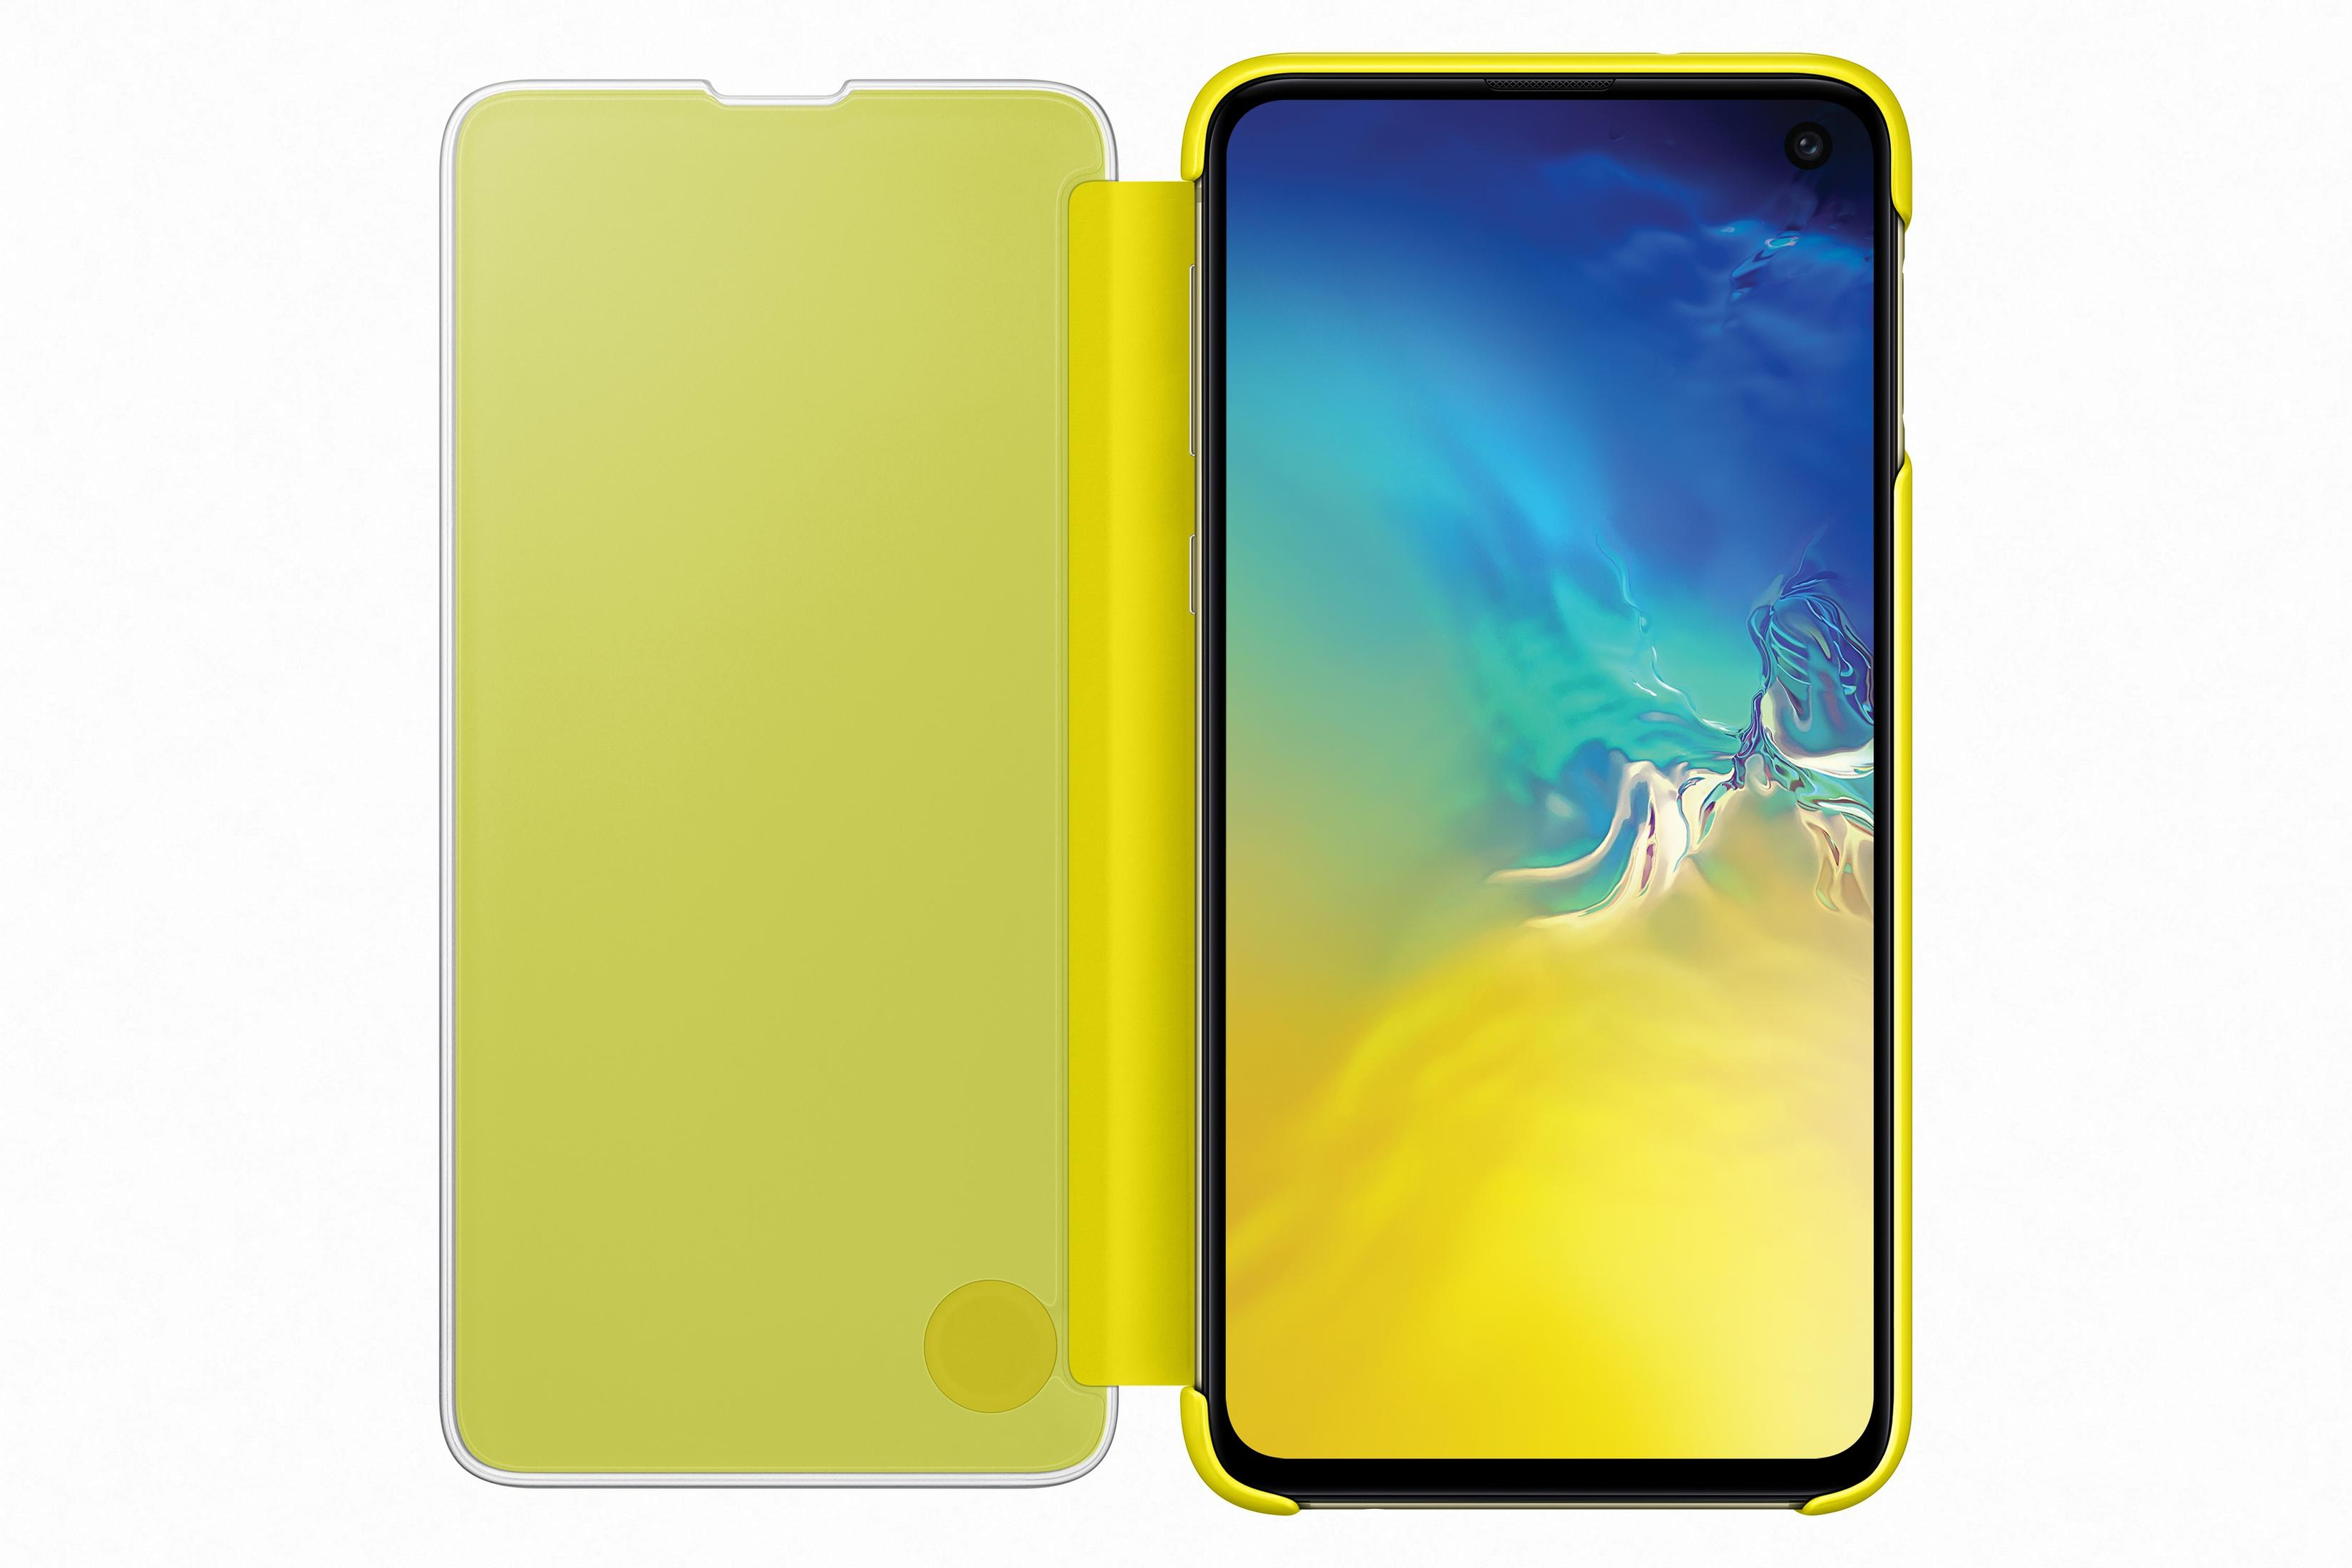 S10E SAMSUNG VIEW YELLOW, CLEAR Samsung, Galaxy COVER Bookcover, S10e, Gelb EF-ZG970CYEGWW